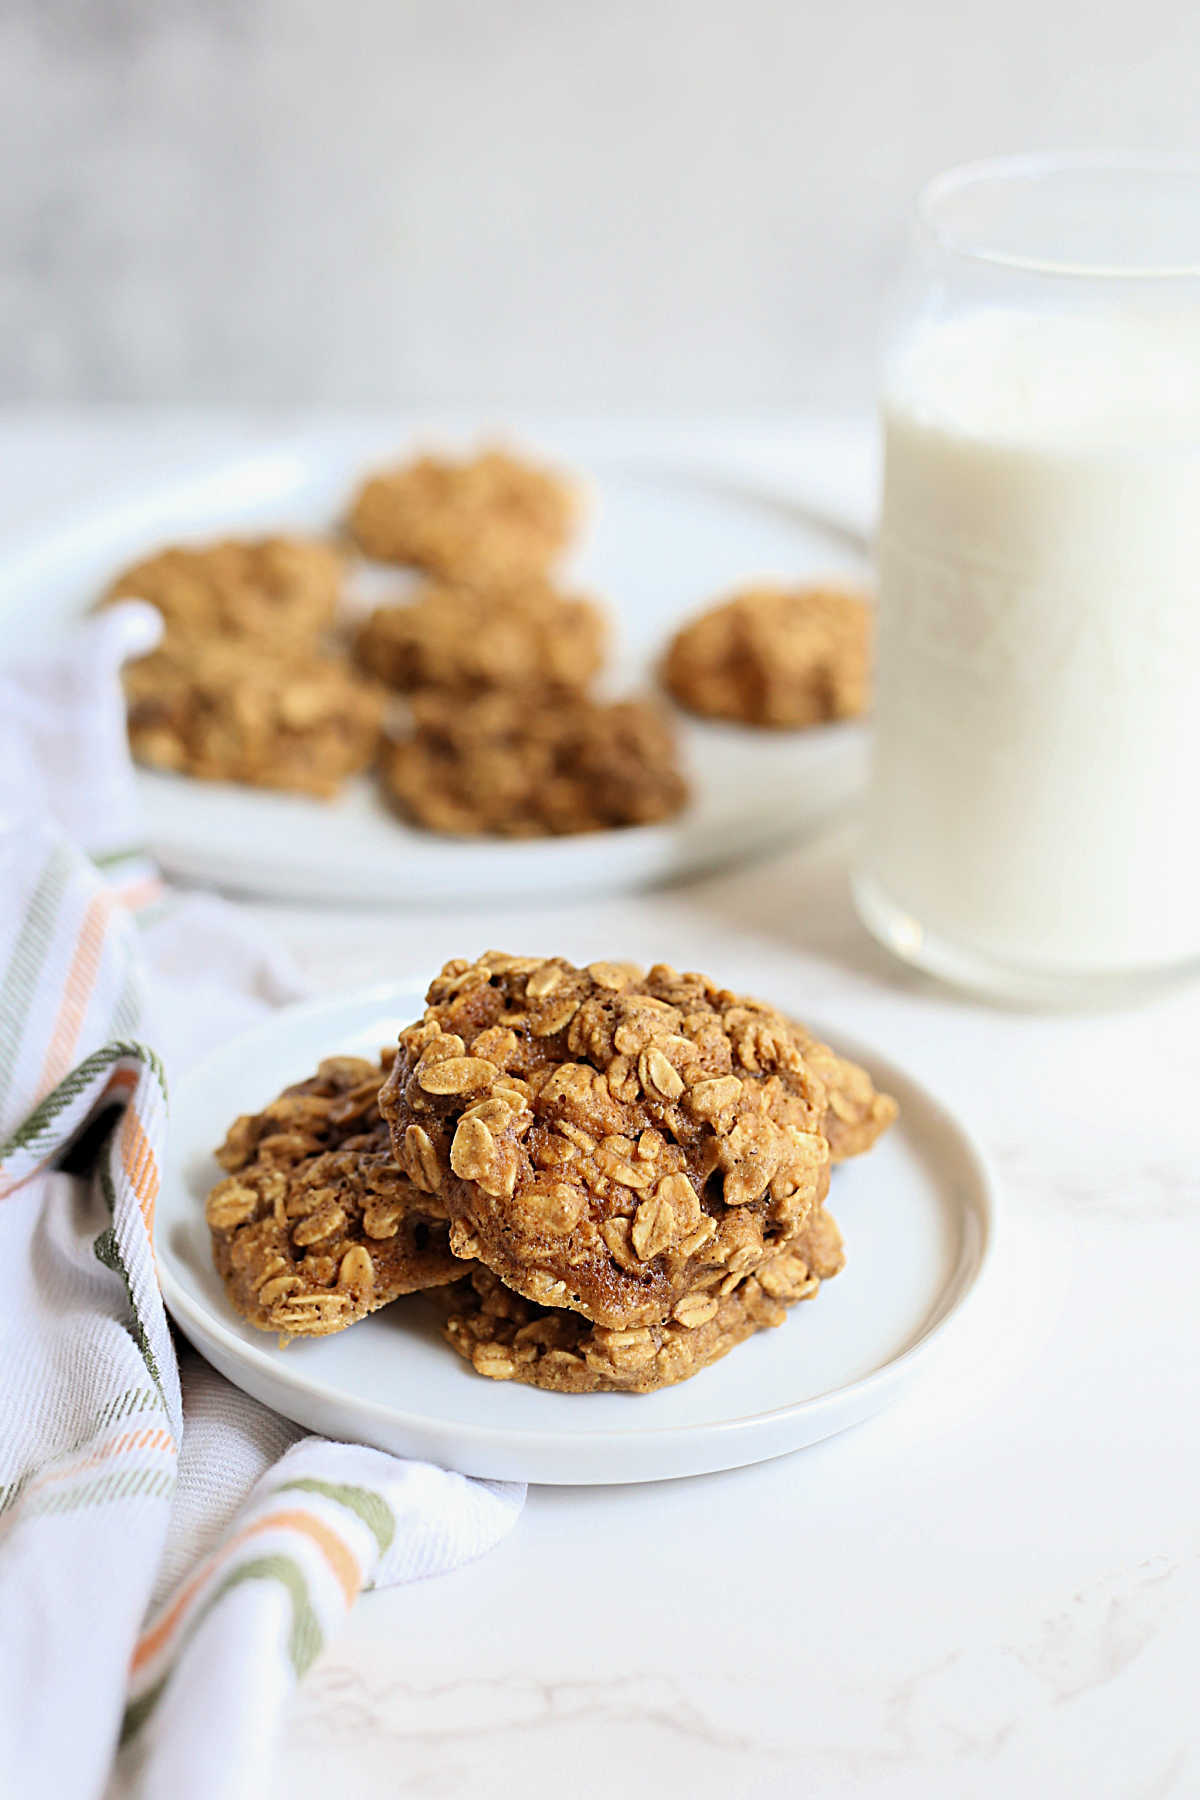 Healthy Chewy Peanut Butter Oatmeal Cookie Recipe On A Plate With A Glass Of Milk And Towel